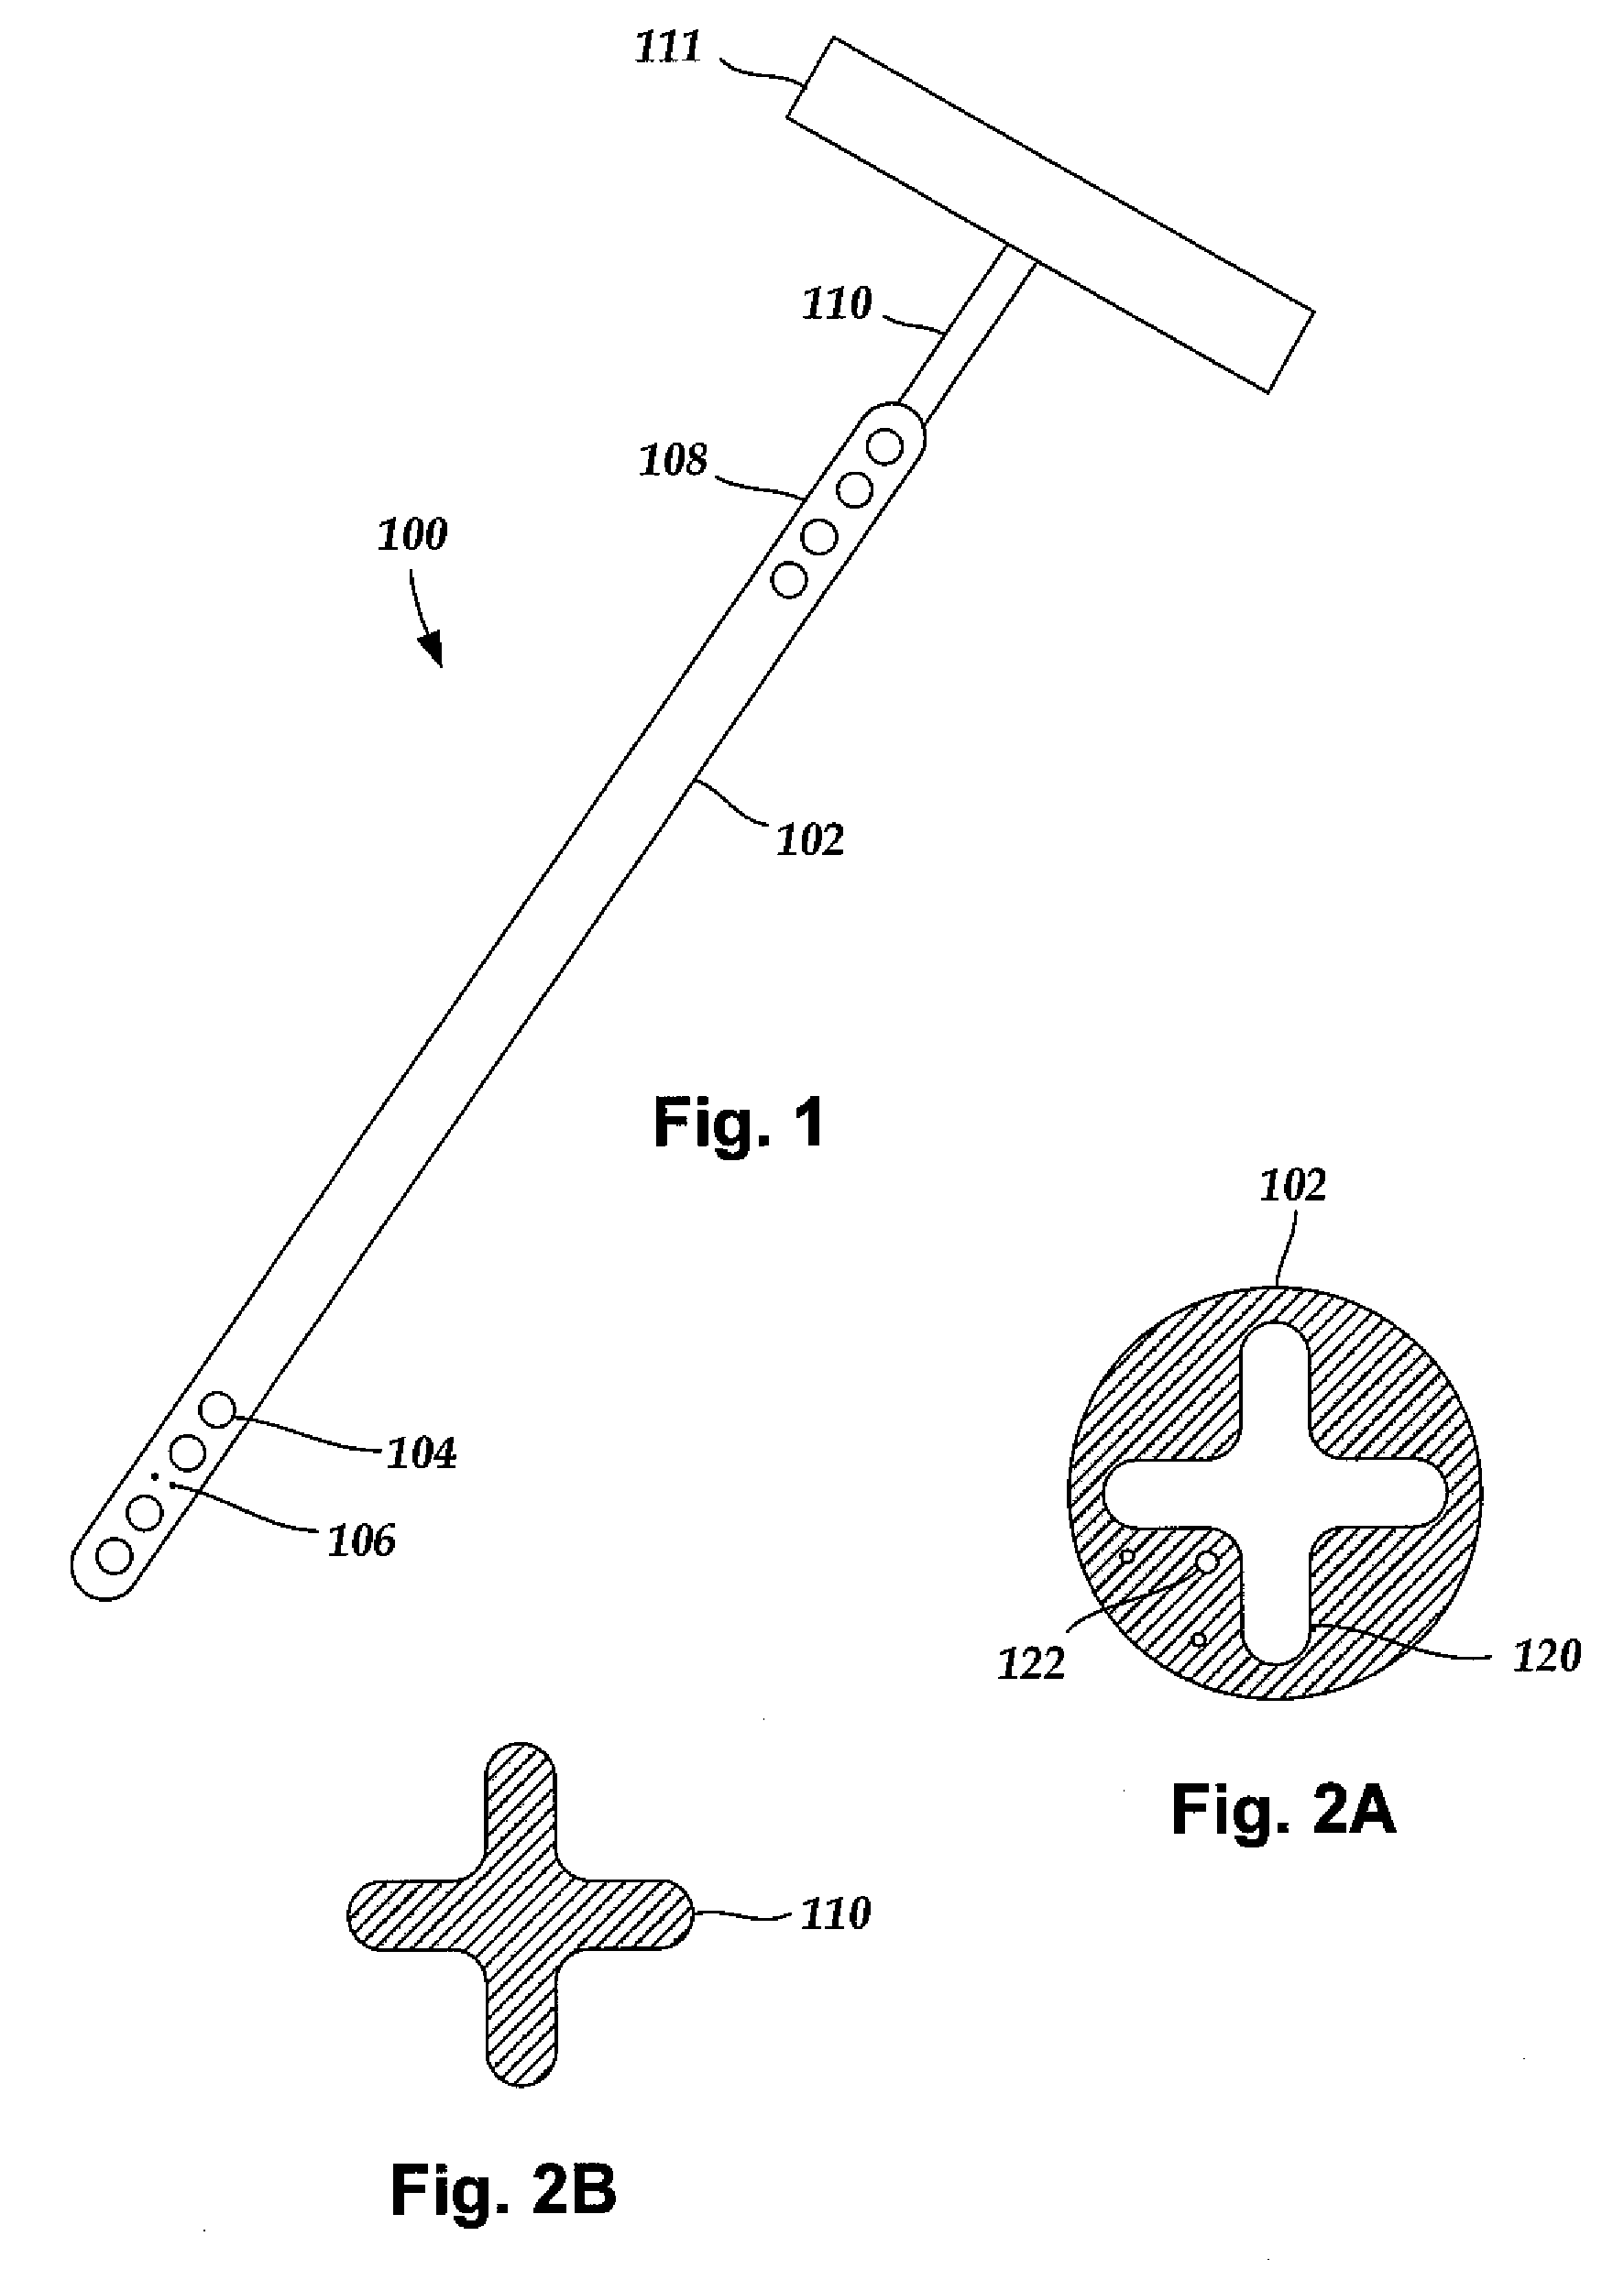 Leads with non-circular-shaped distal ends for brain stimulation systems and methods of making and using